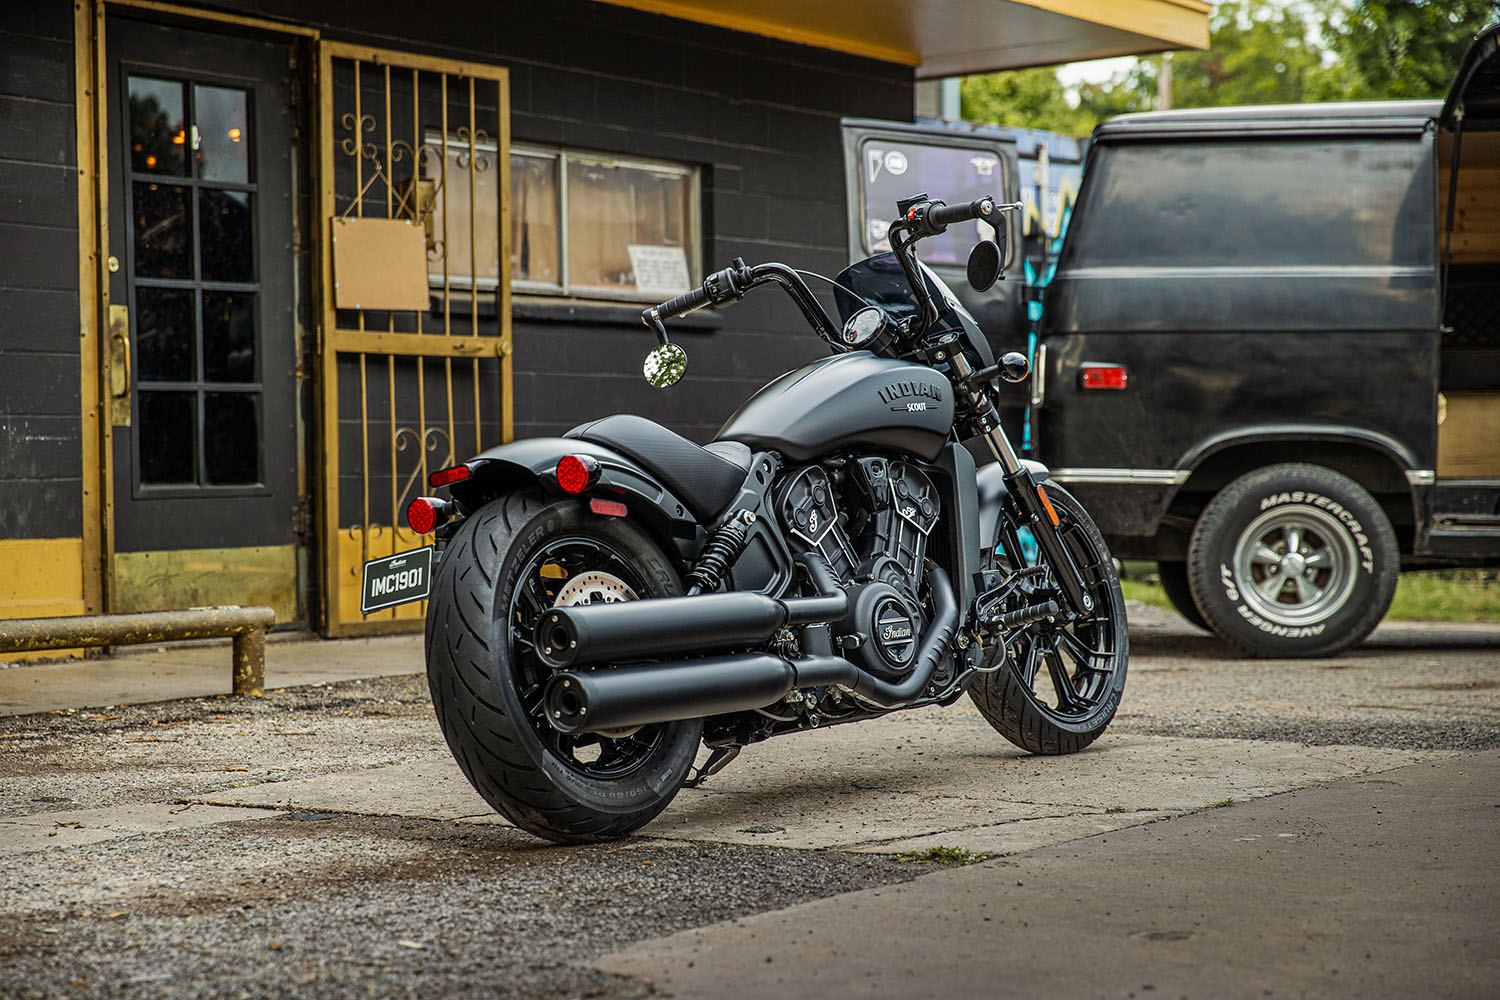 2022 Indian Scout® Rogue ABS in Waynesville, North Carolina - Photo 15